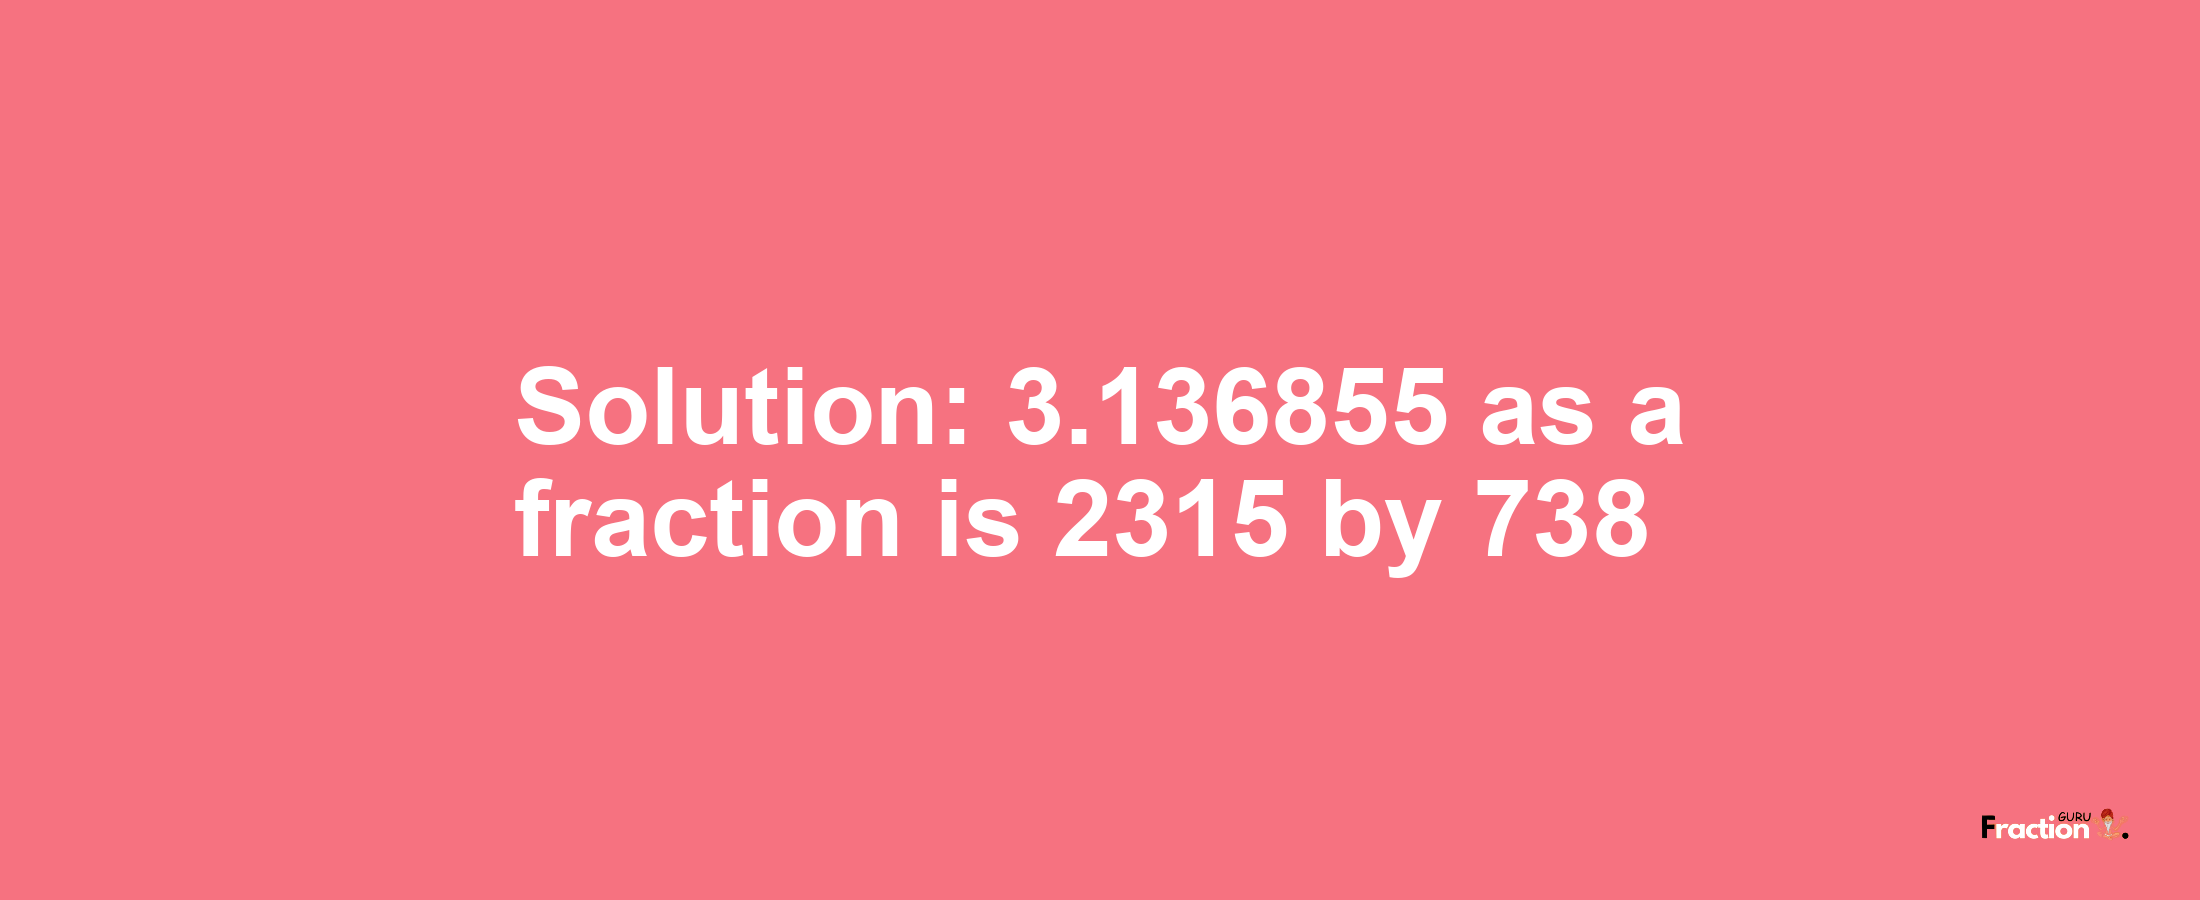 Solution:3.136855 as a fraction is 2315/738